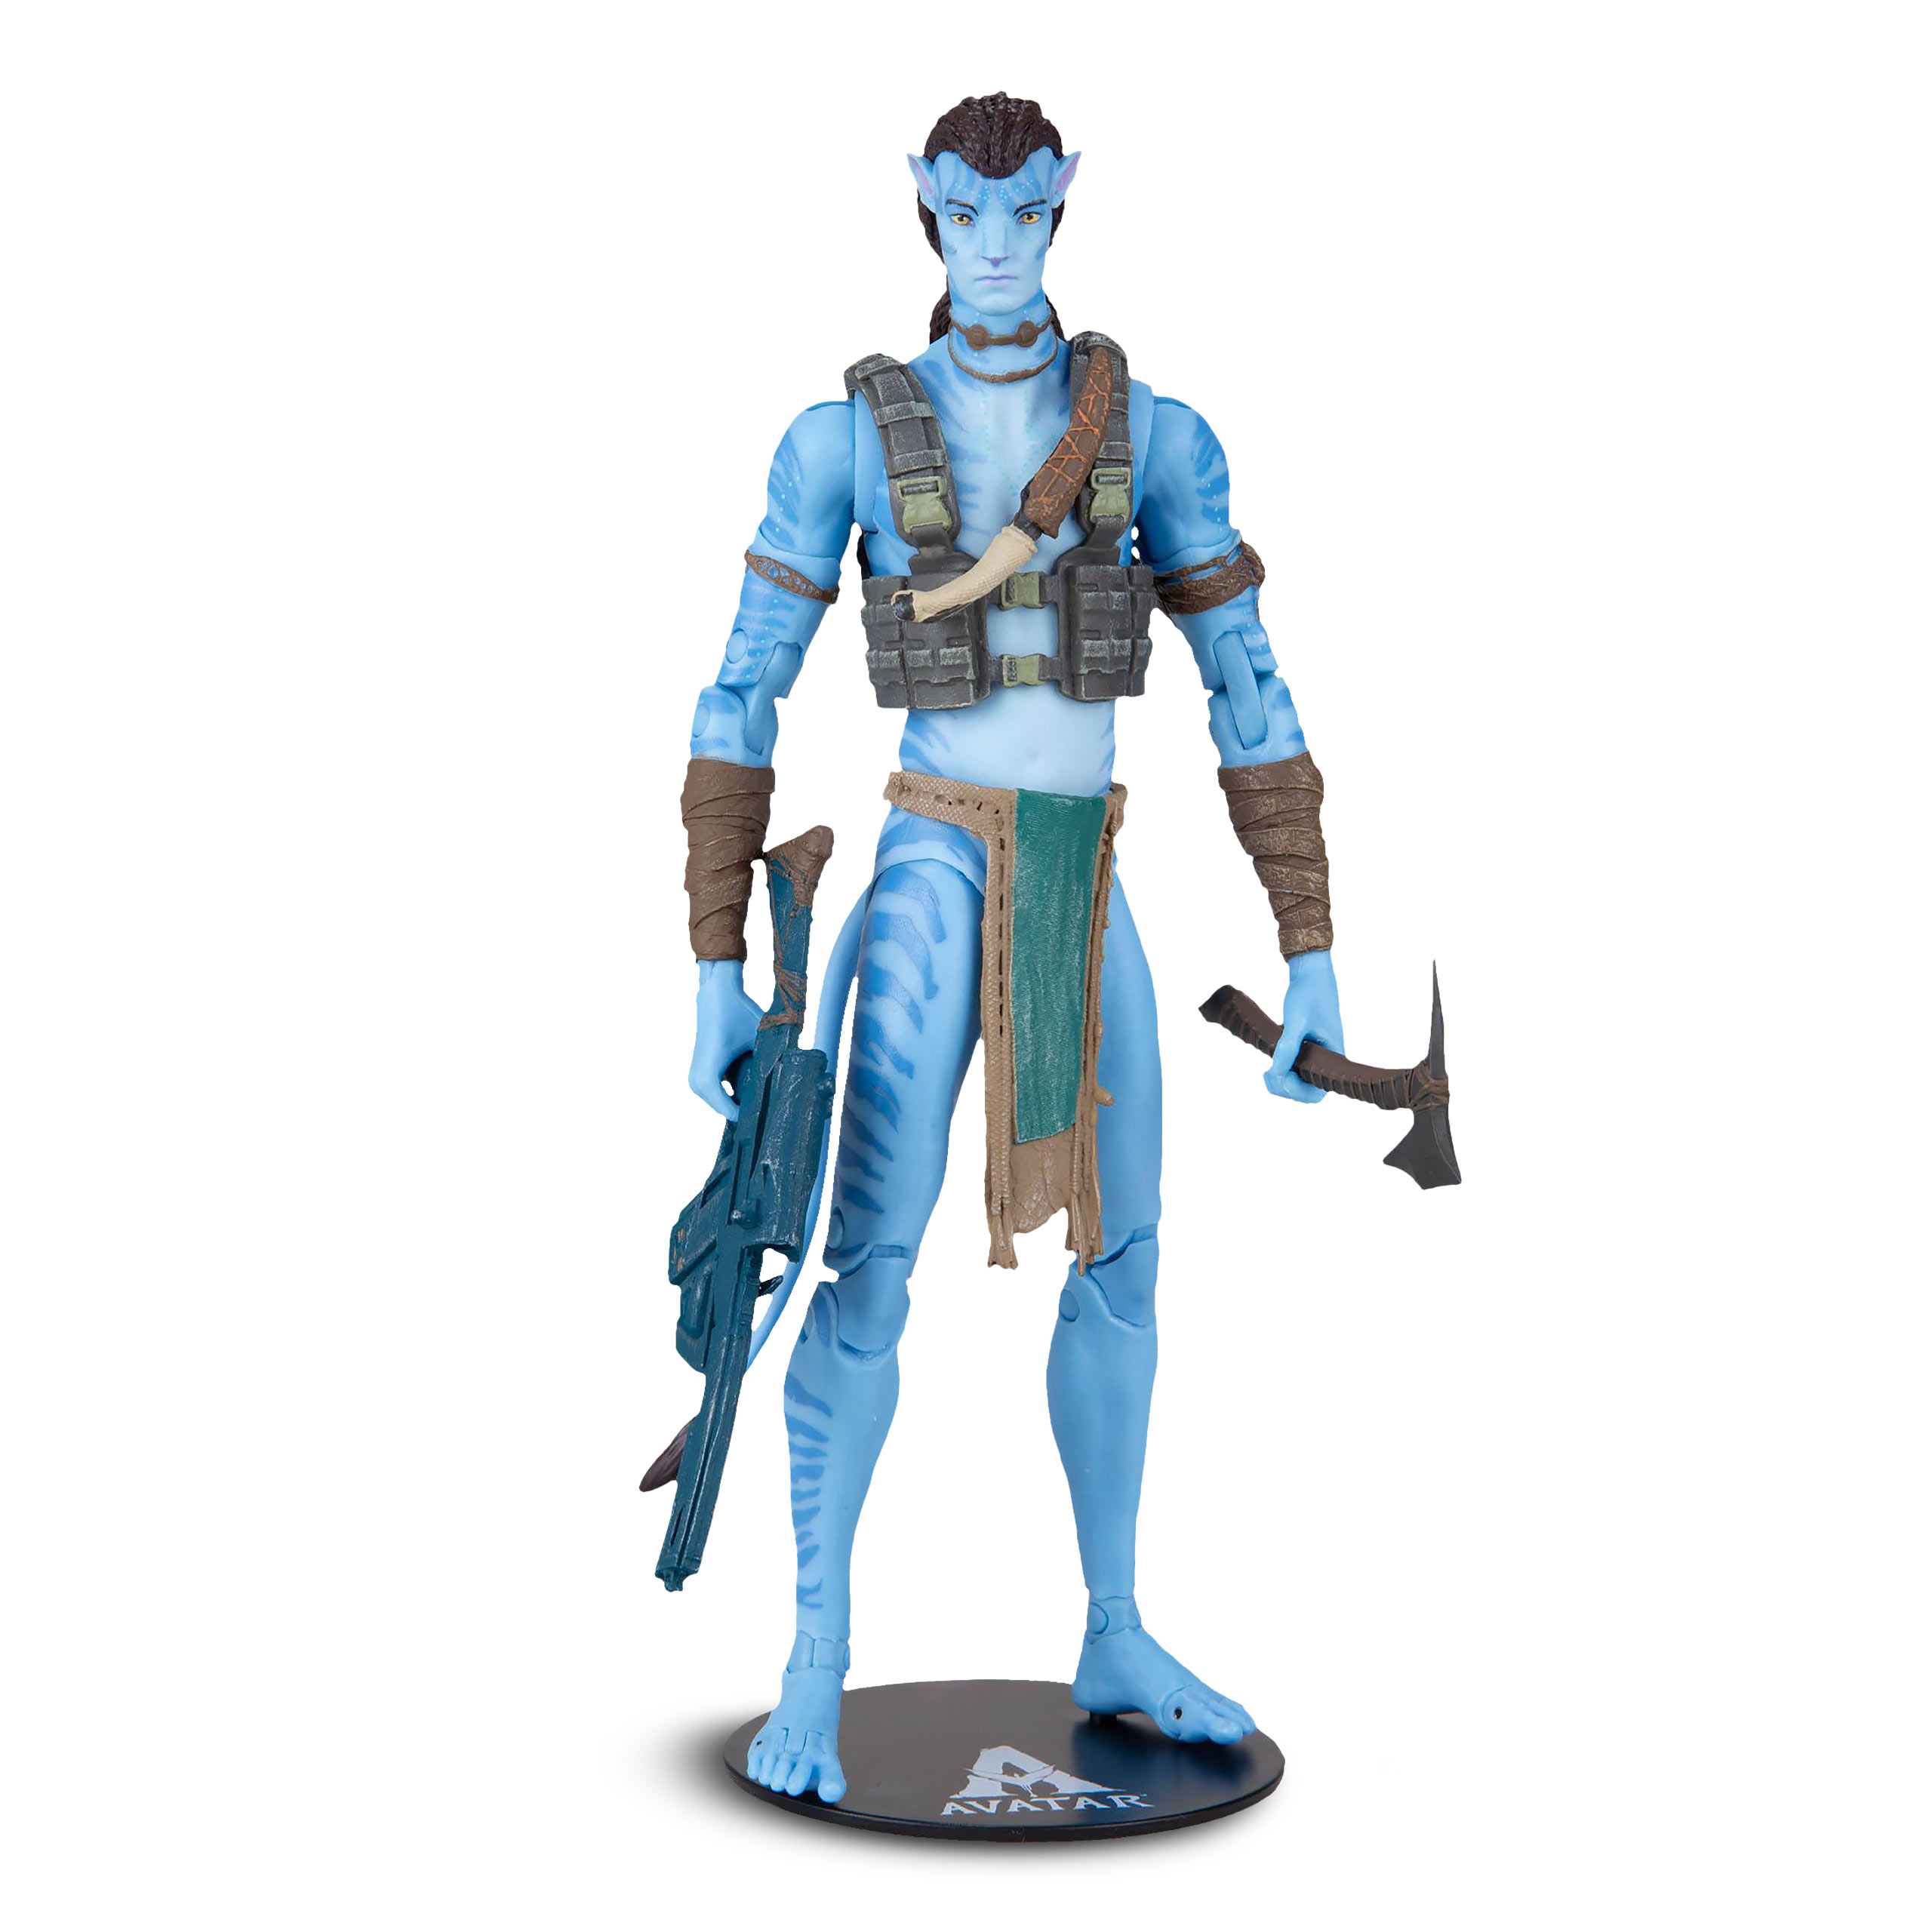 Avatar: The Way of Water - Jake Sully Actionfigur